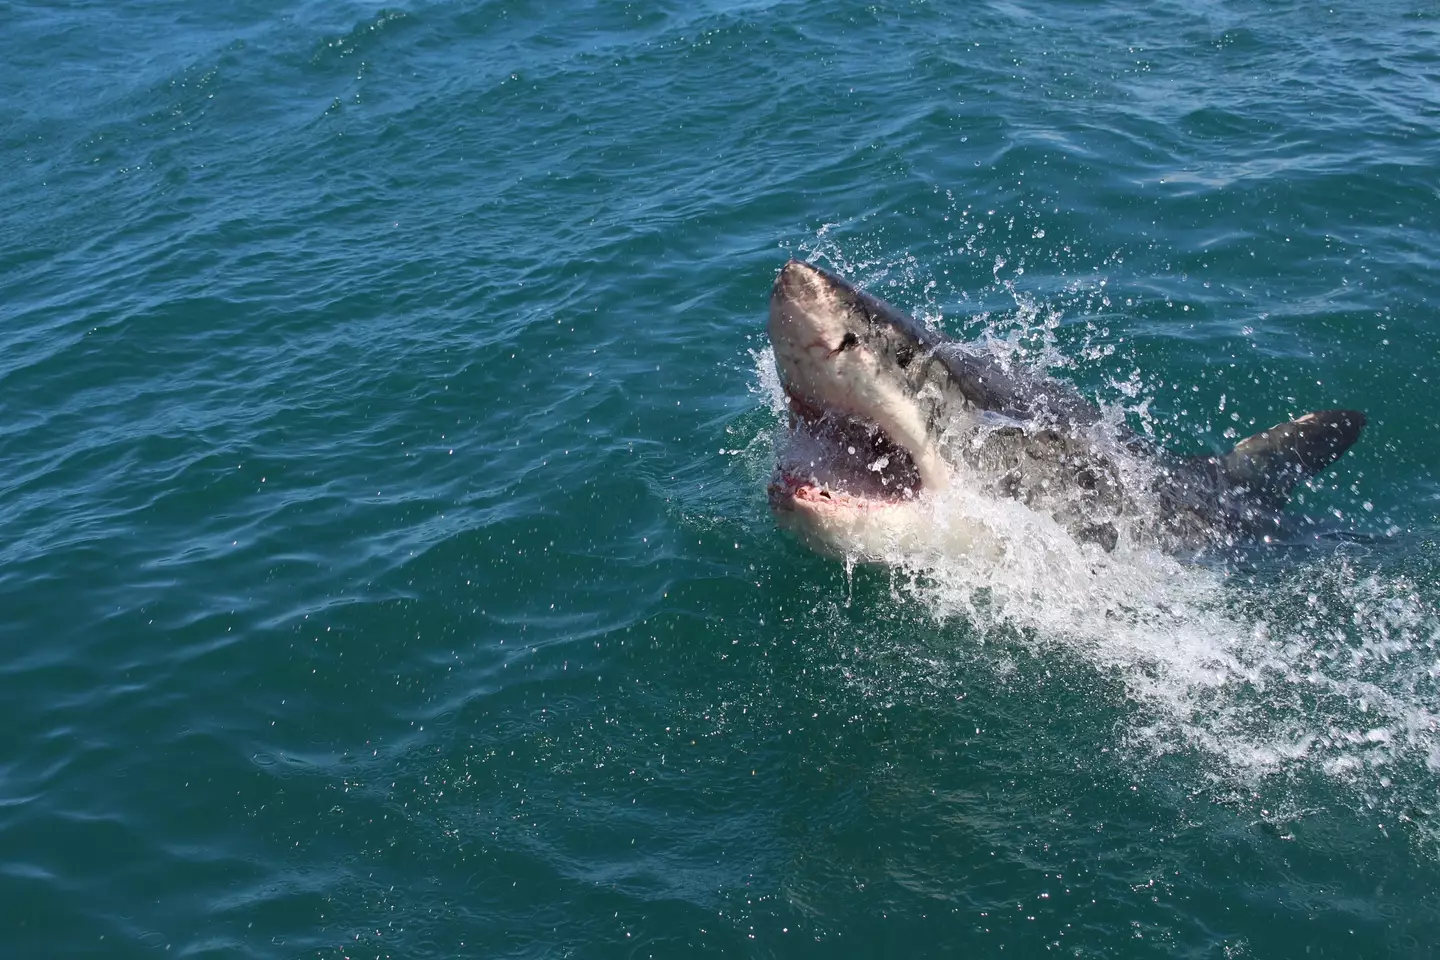 A great white shark sighting in the UK could be closer than you think.